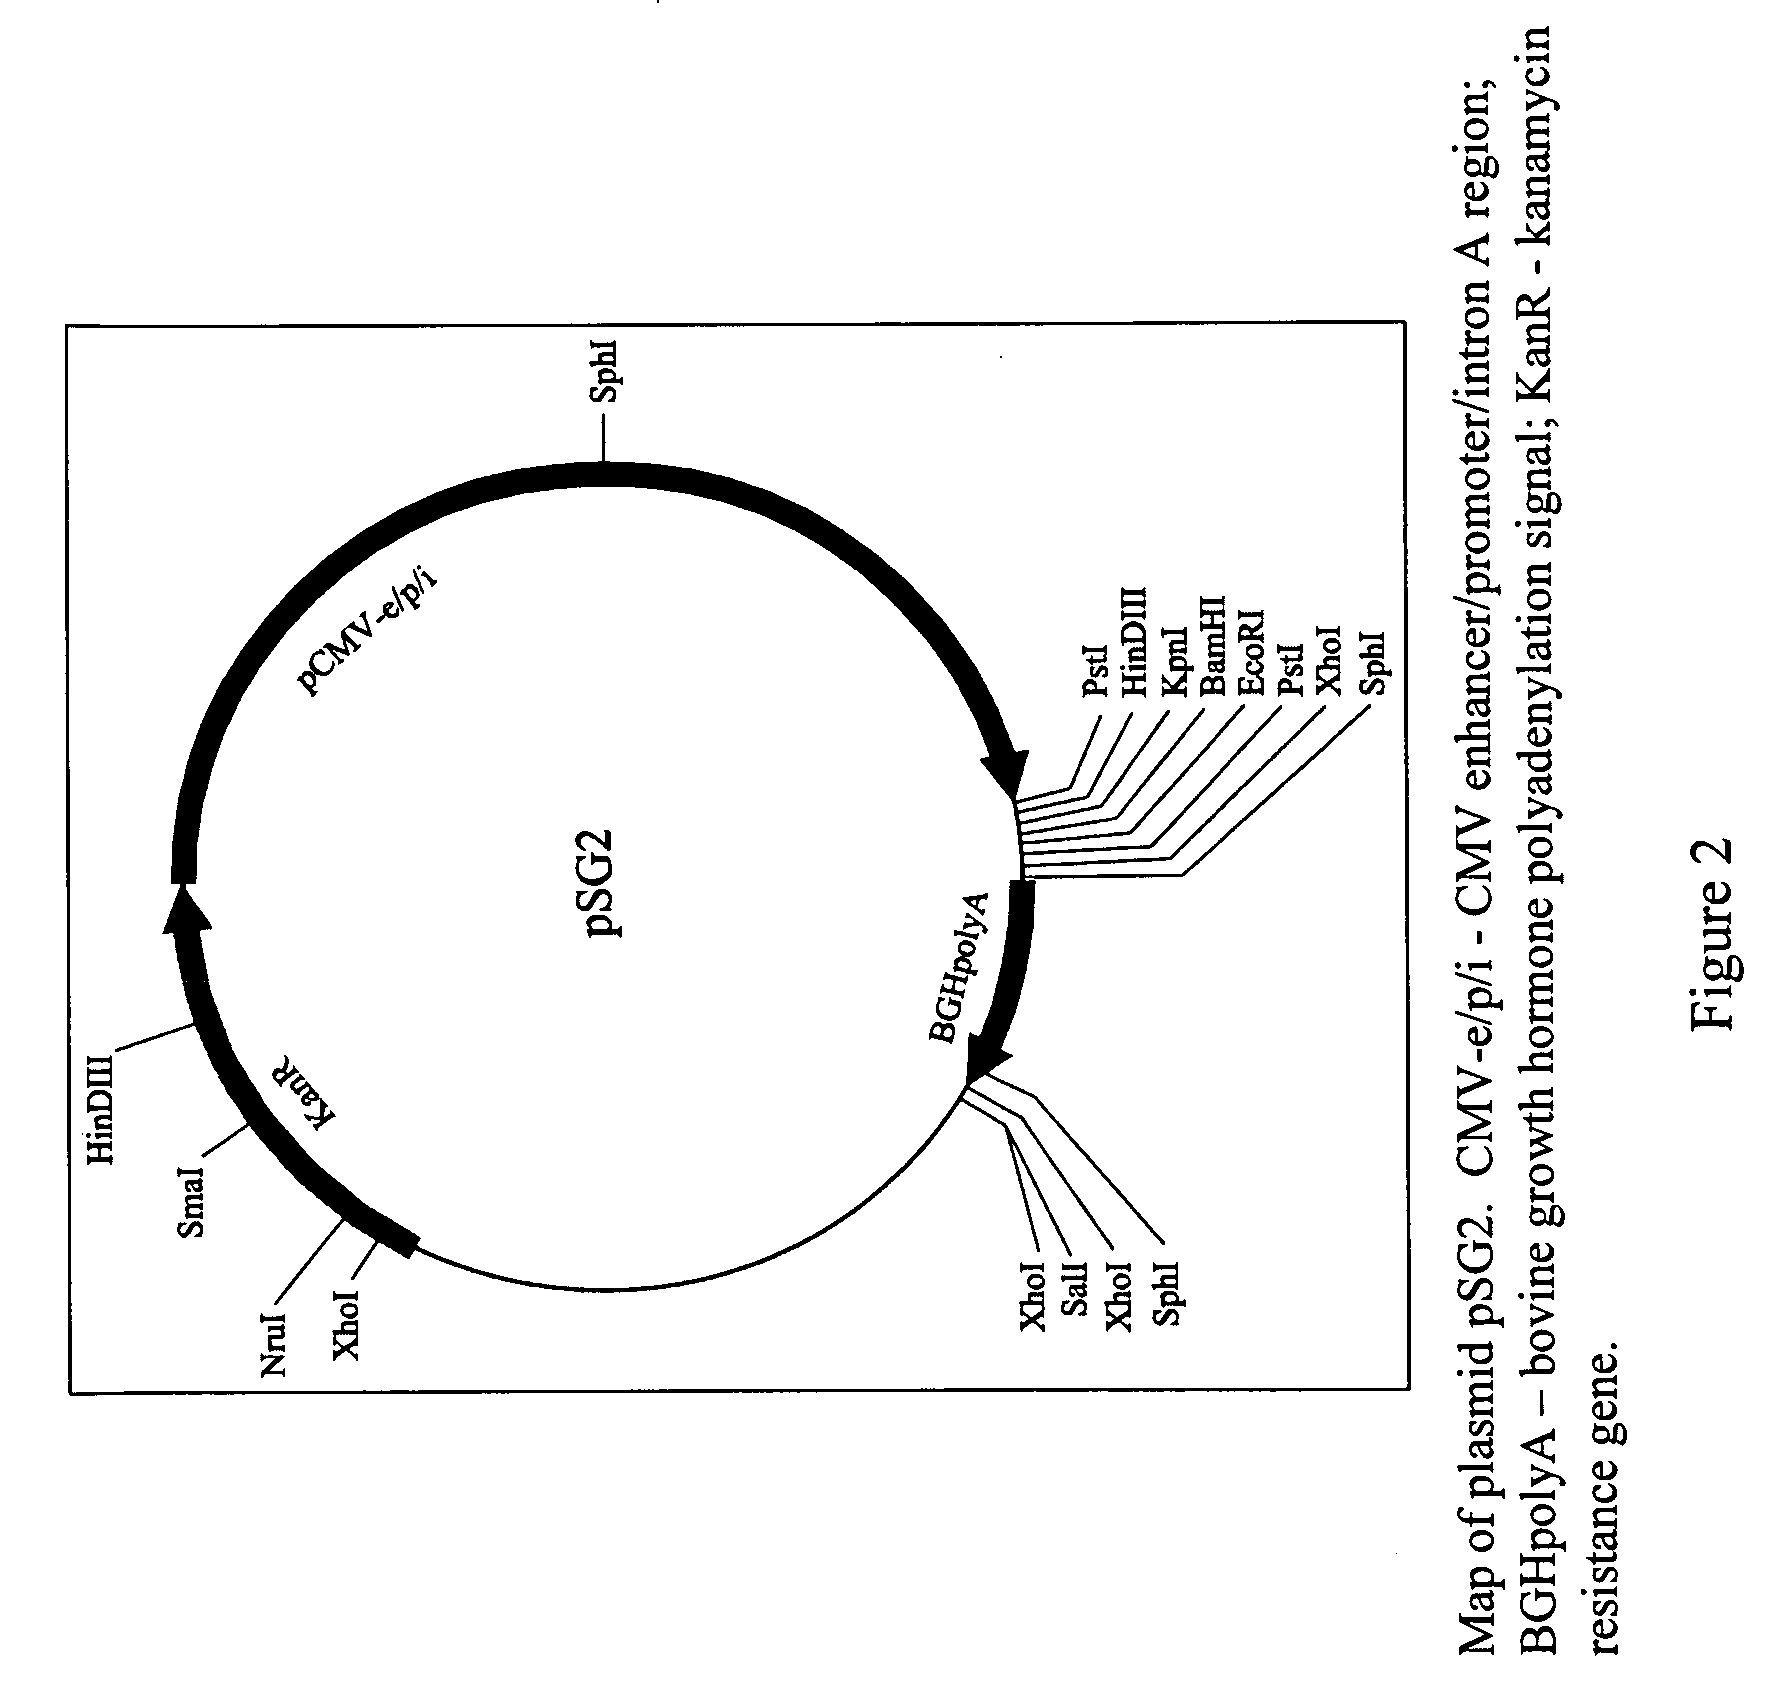 Compositions for inducing an immune response against hepatitis B